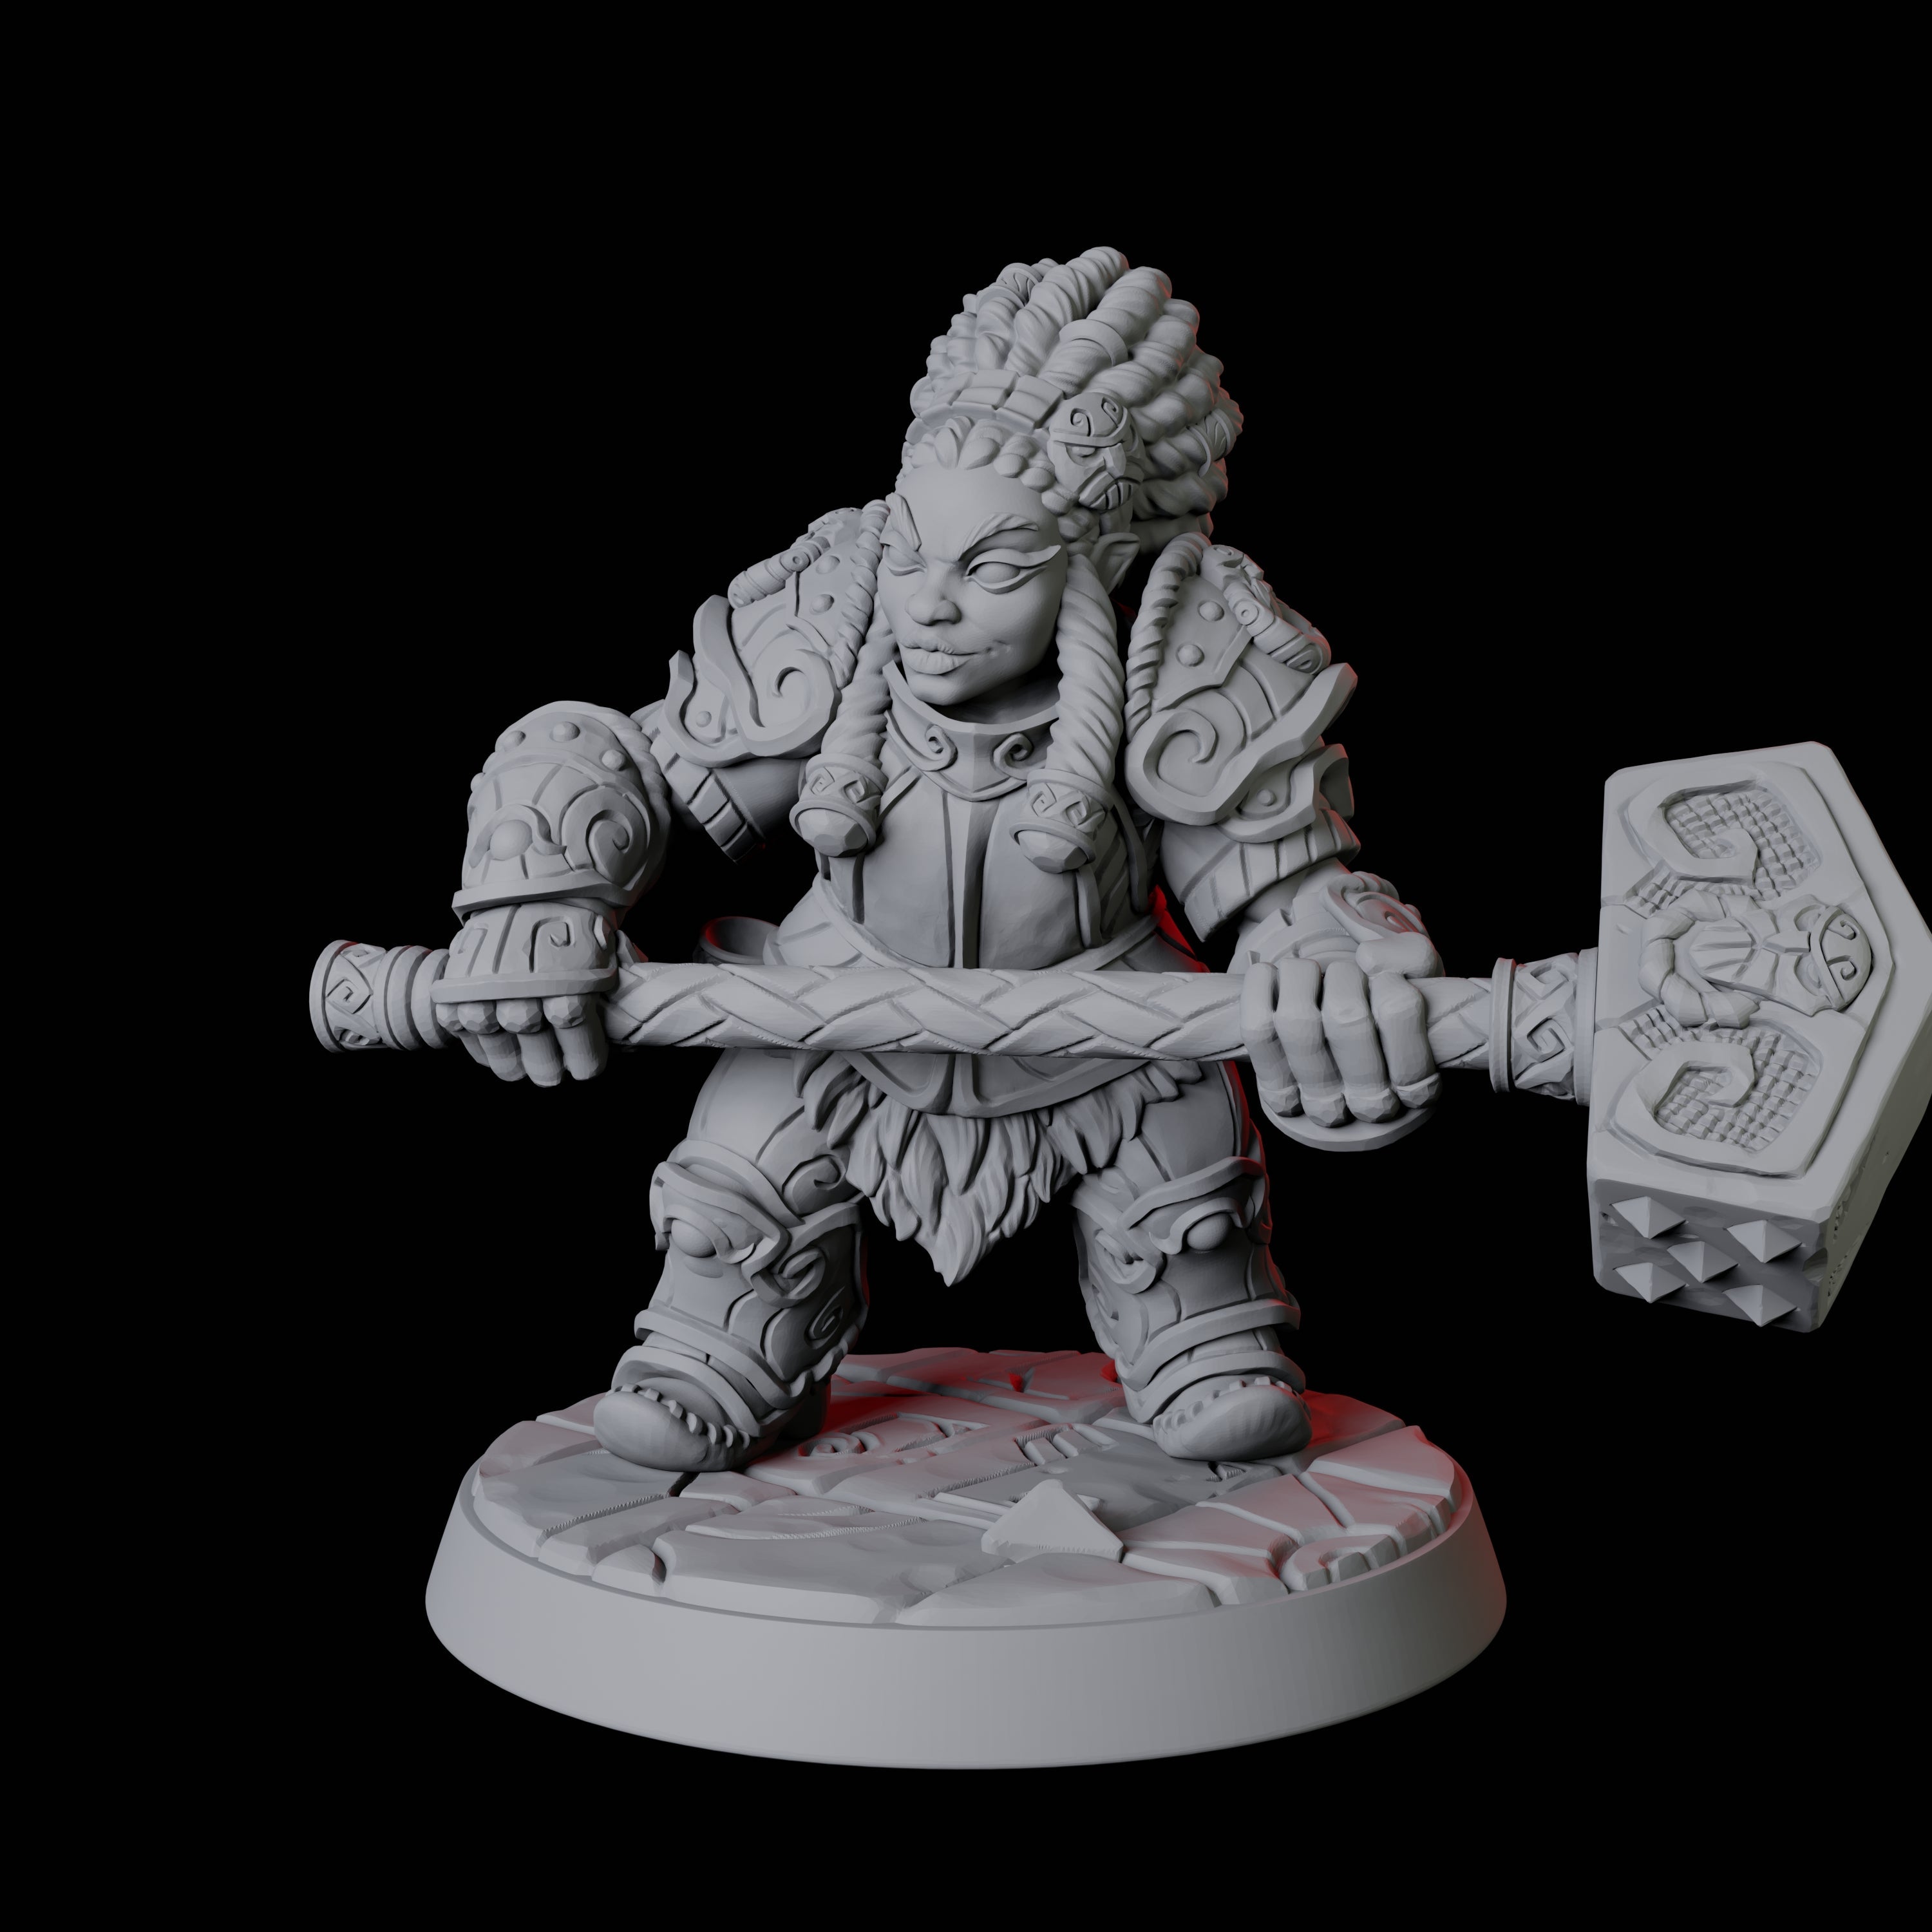 City Guard Dwarf E Miniature for Dungeons and Dragons, Pathfinder or other TTRPGs